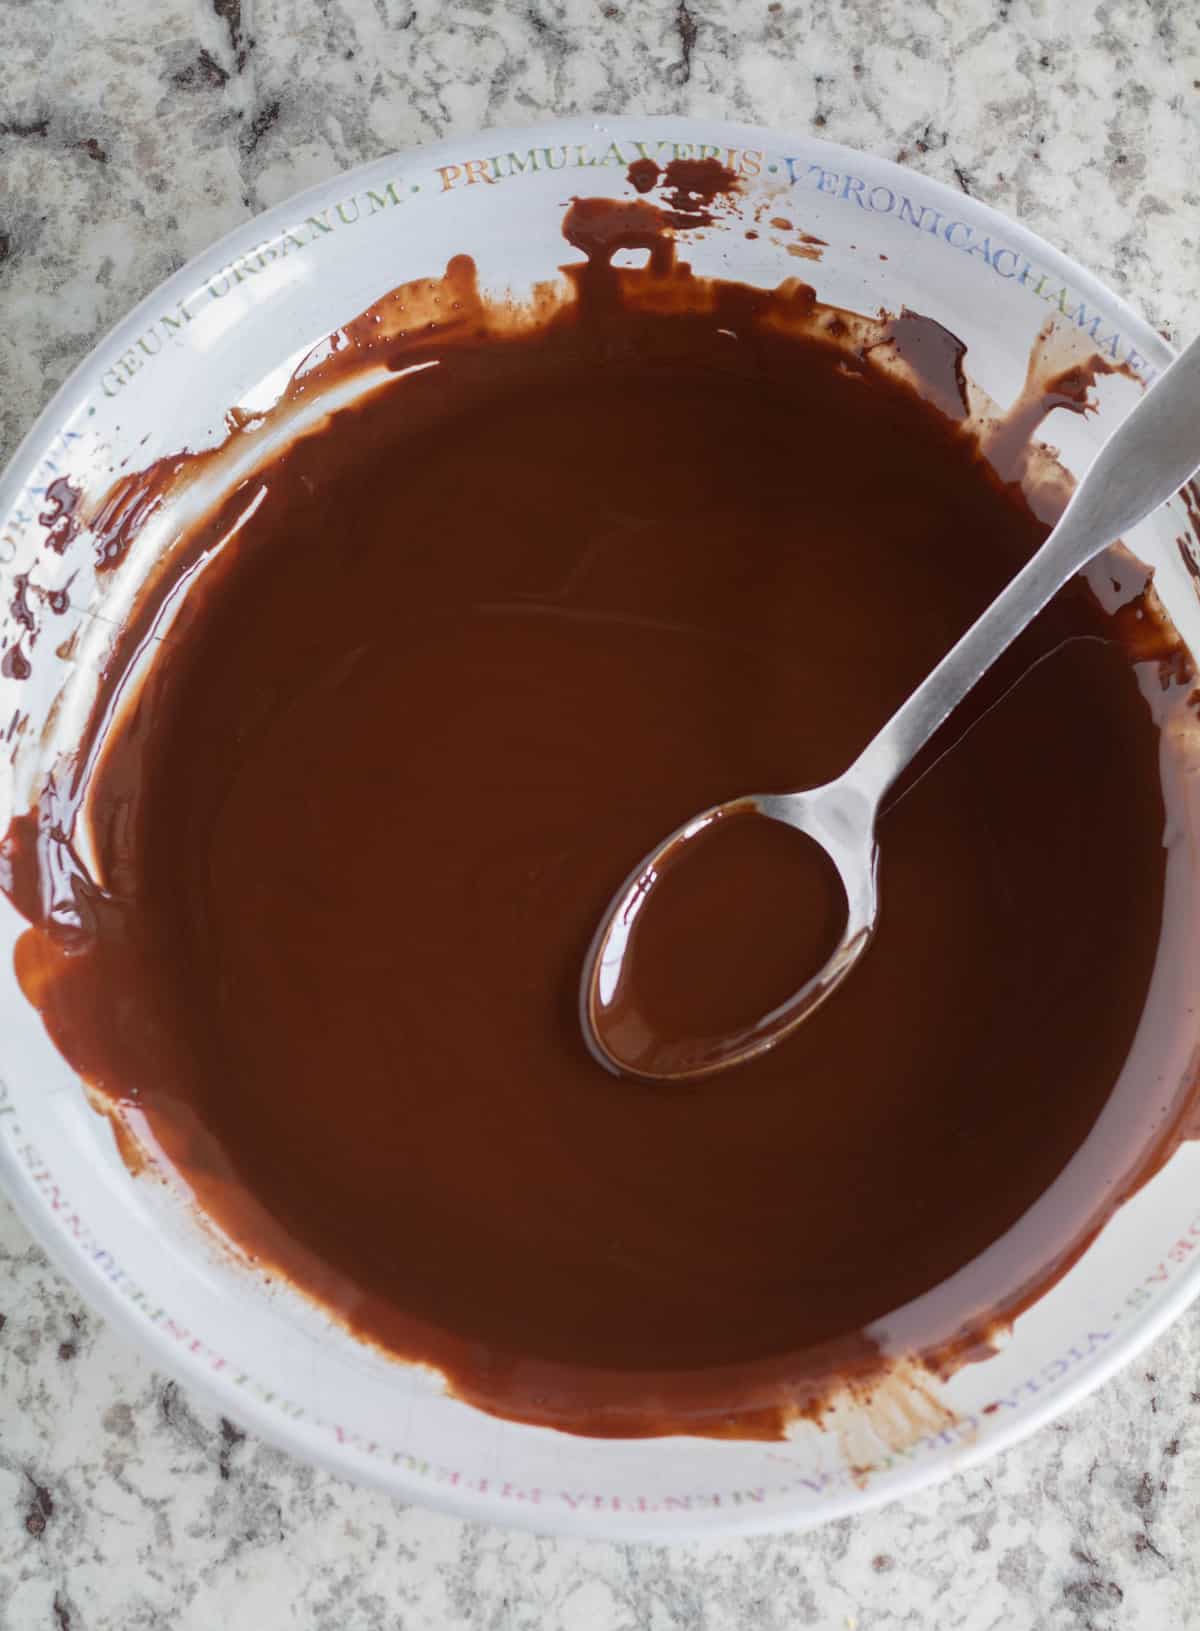 melted chocolate and coconut oil in large white bowl